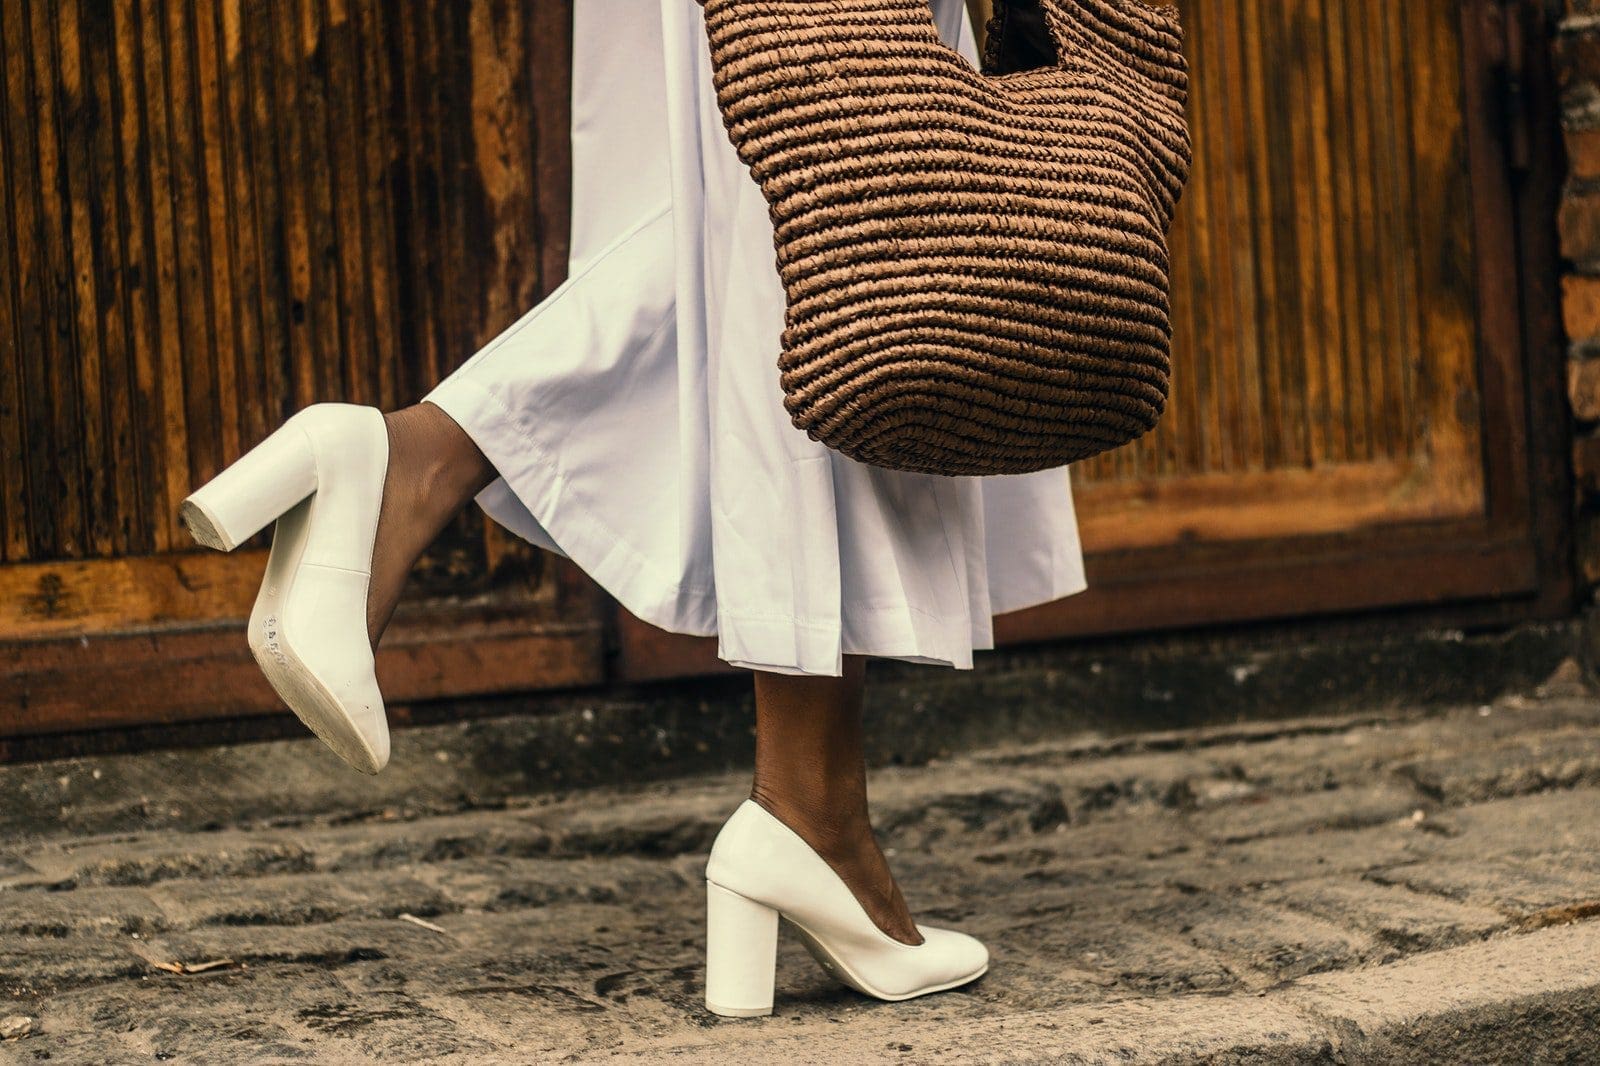 shoes for women Woman Wearing White Dress and White High-heeled Shoes While Walking on Sidewalk